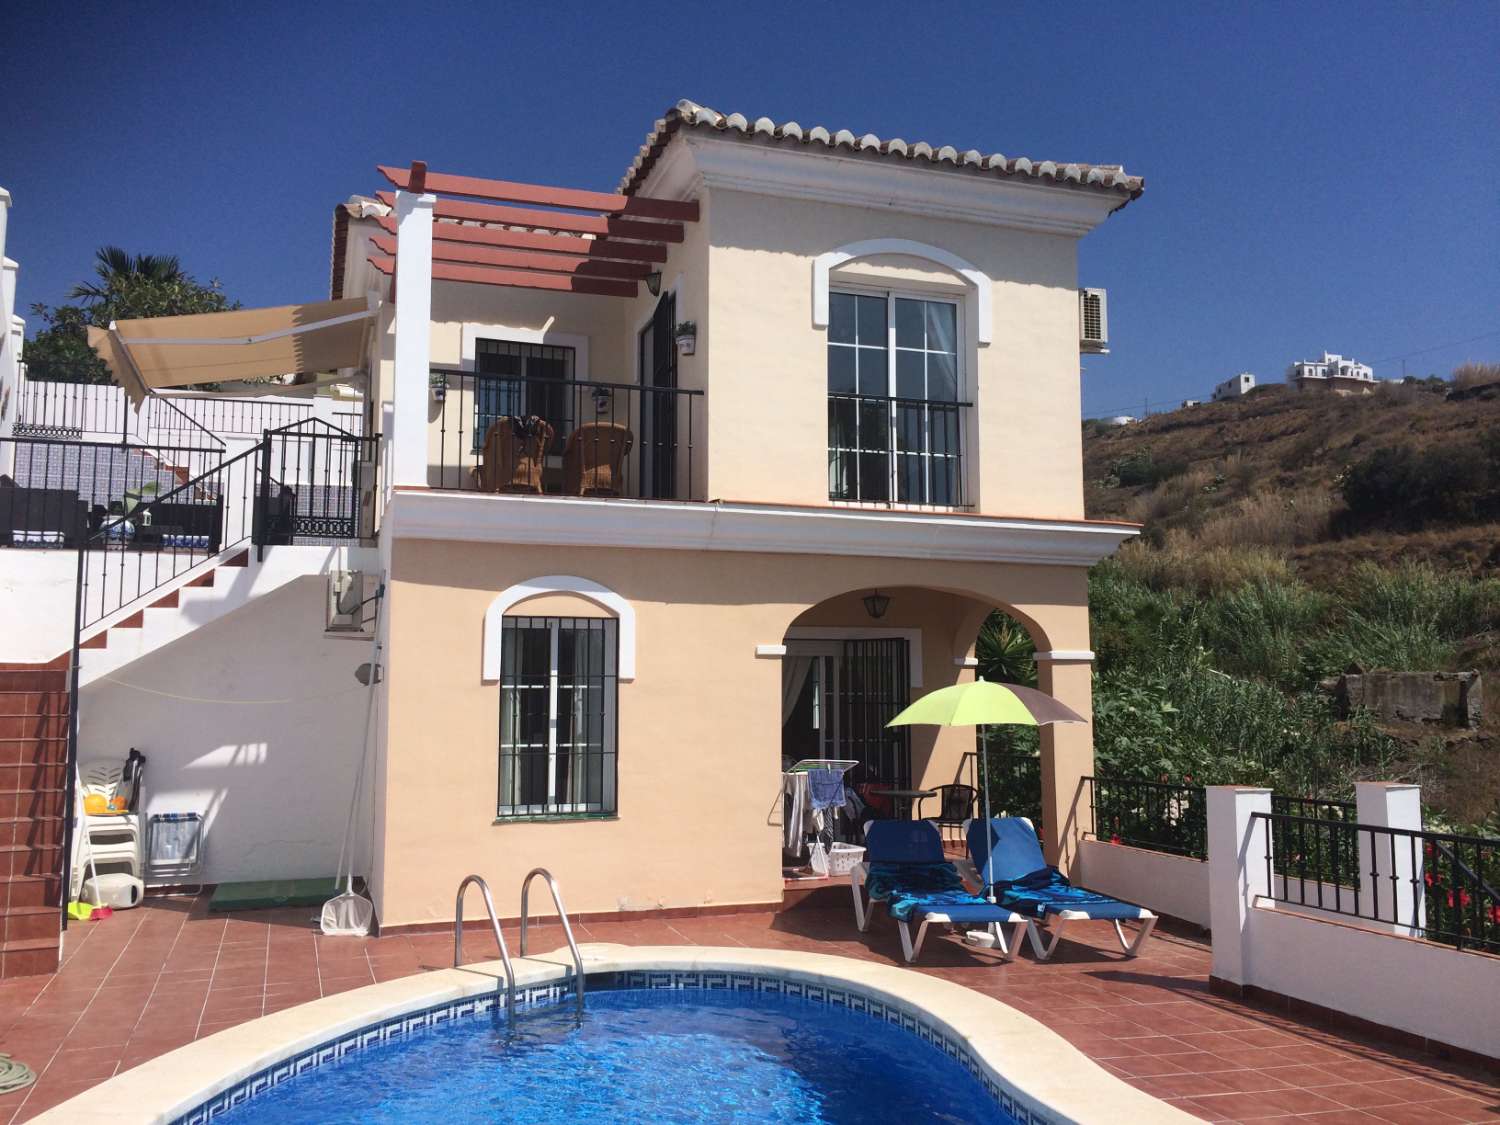 Detached villa for sale with private pool